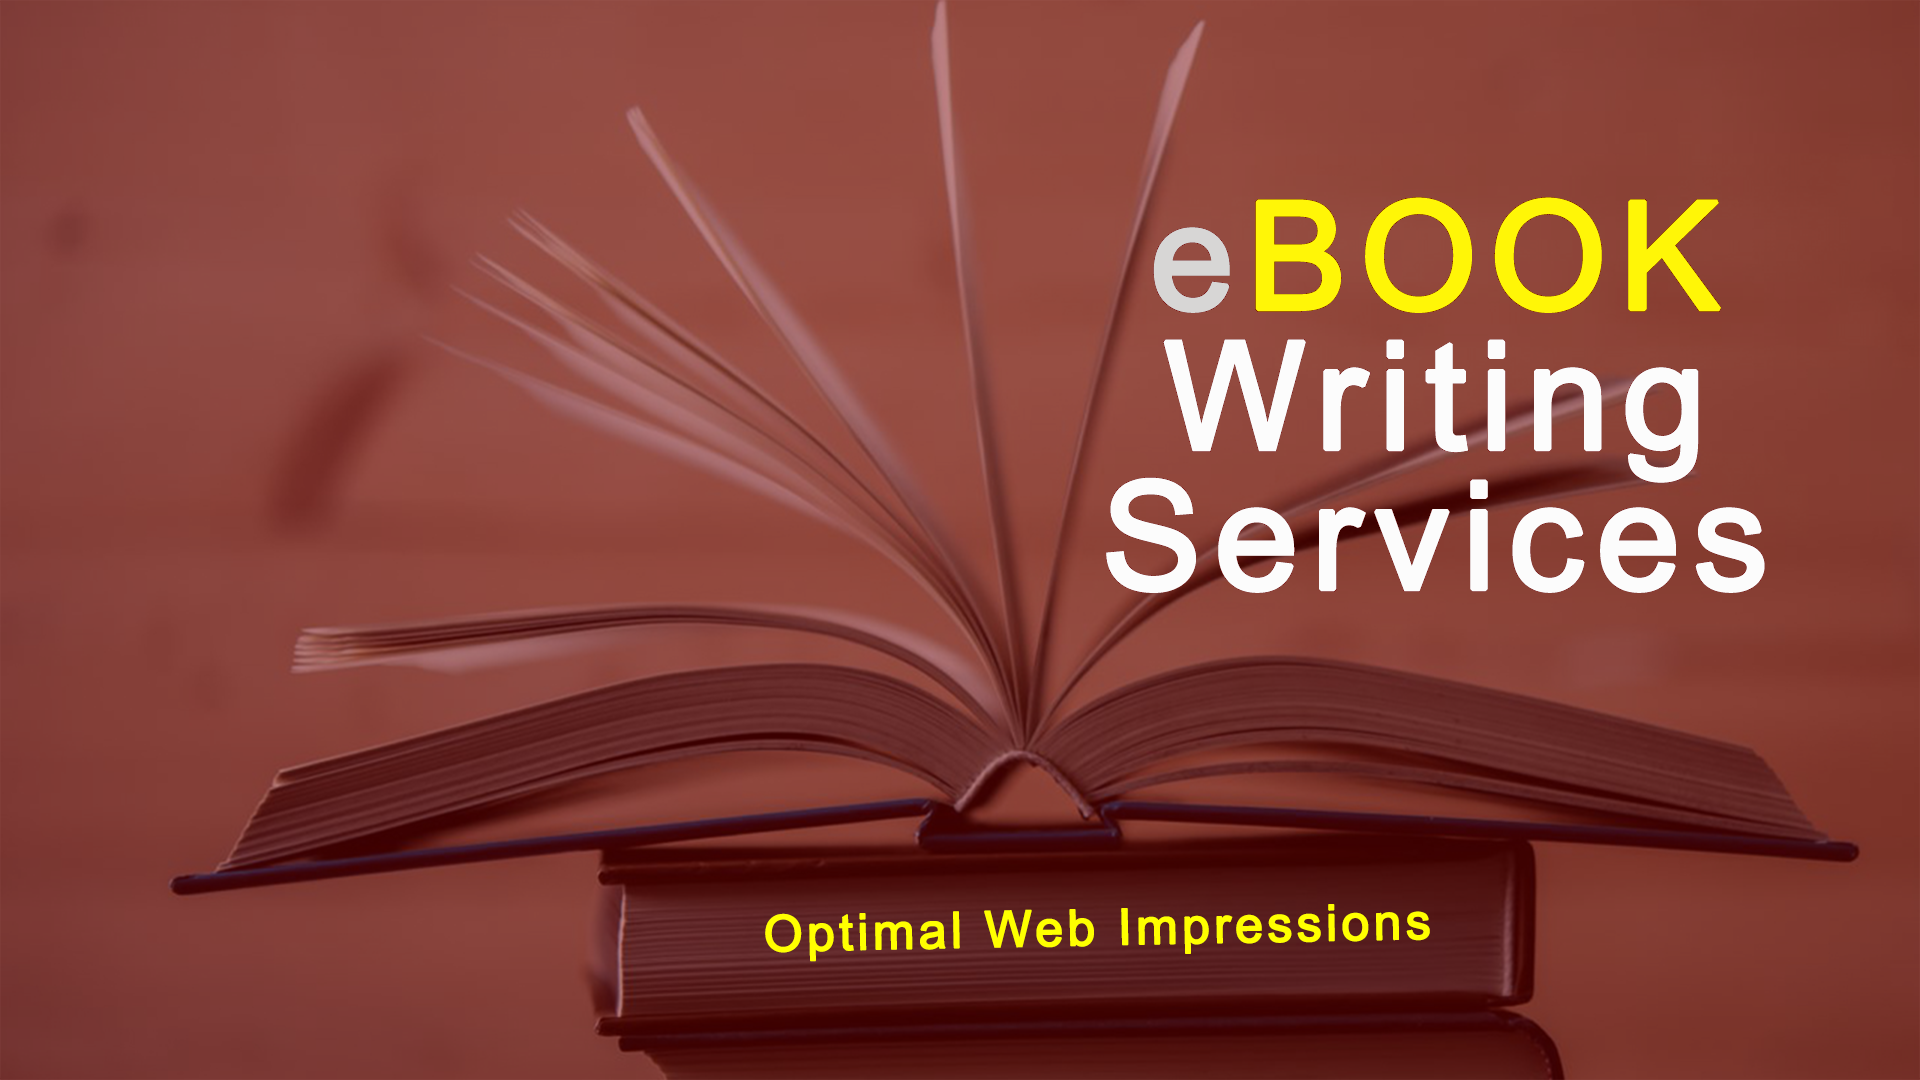 ebook-writing-services